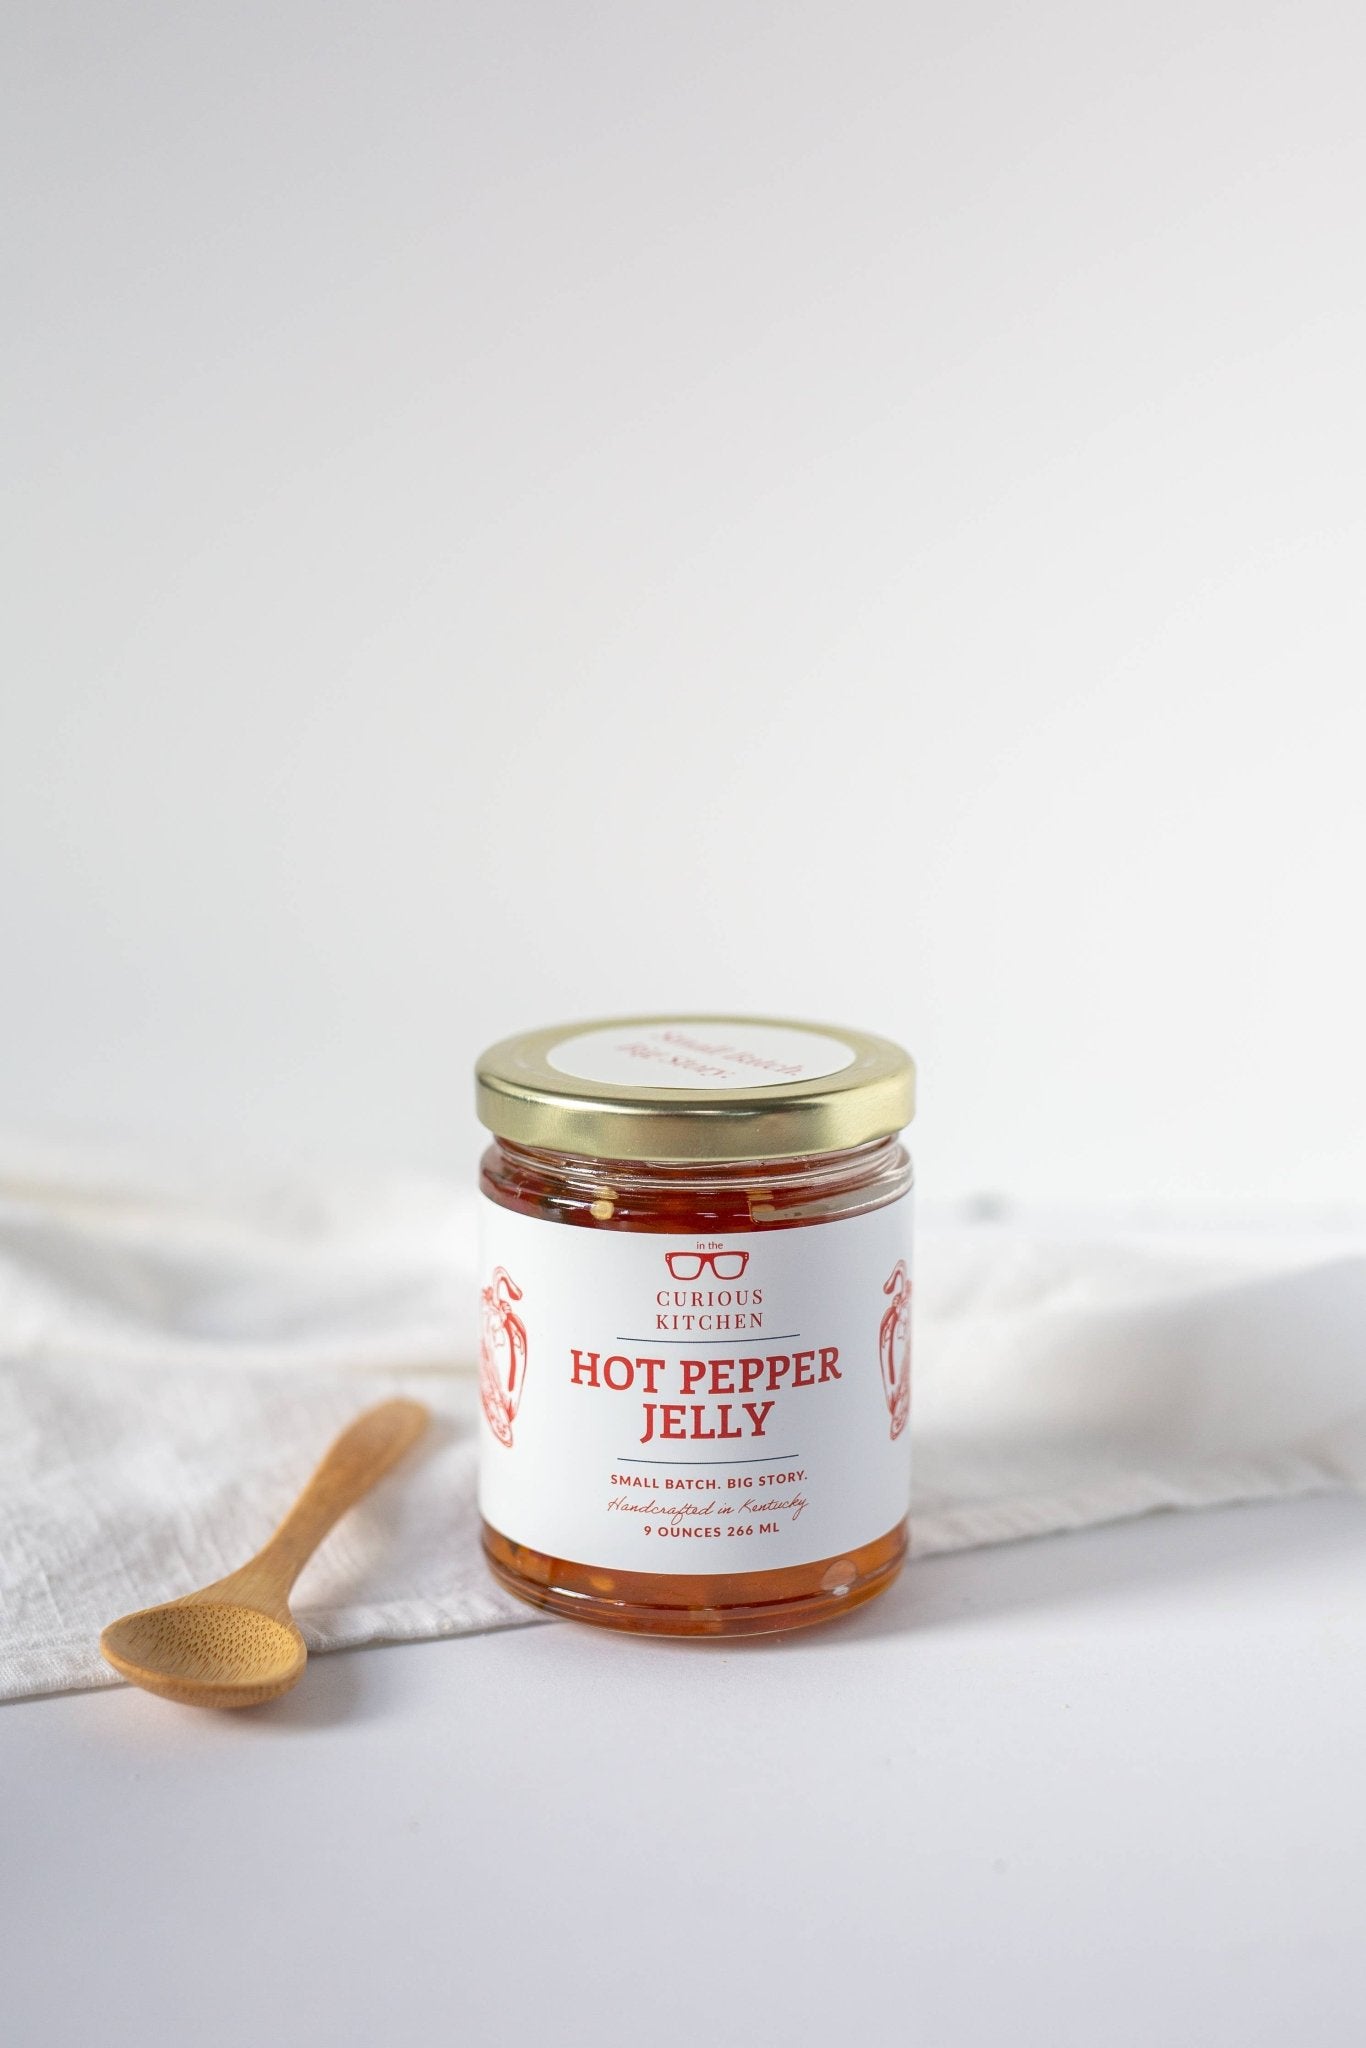 In the Curious Kitchen - Hot Pepper Jelly - Gaines Jewelers